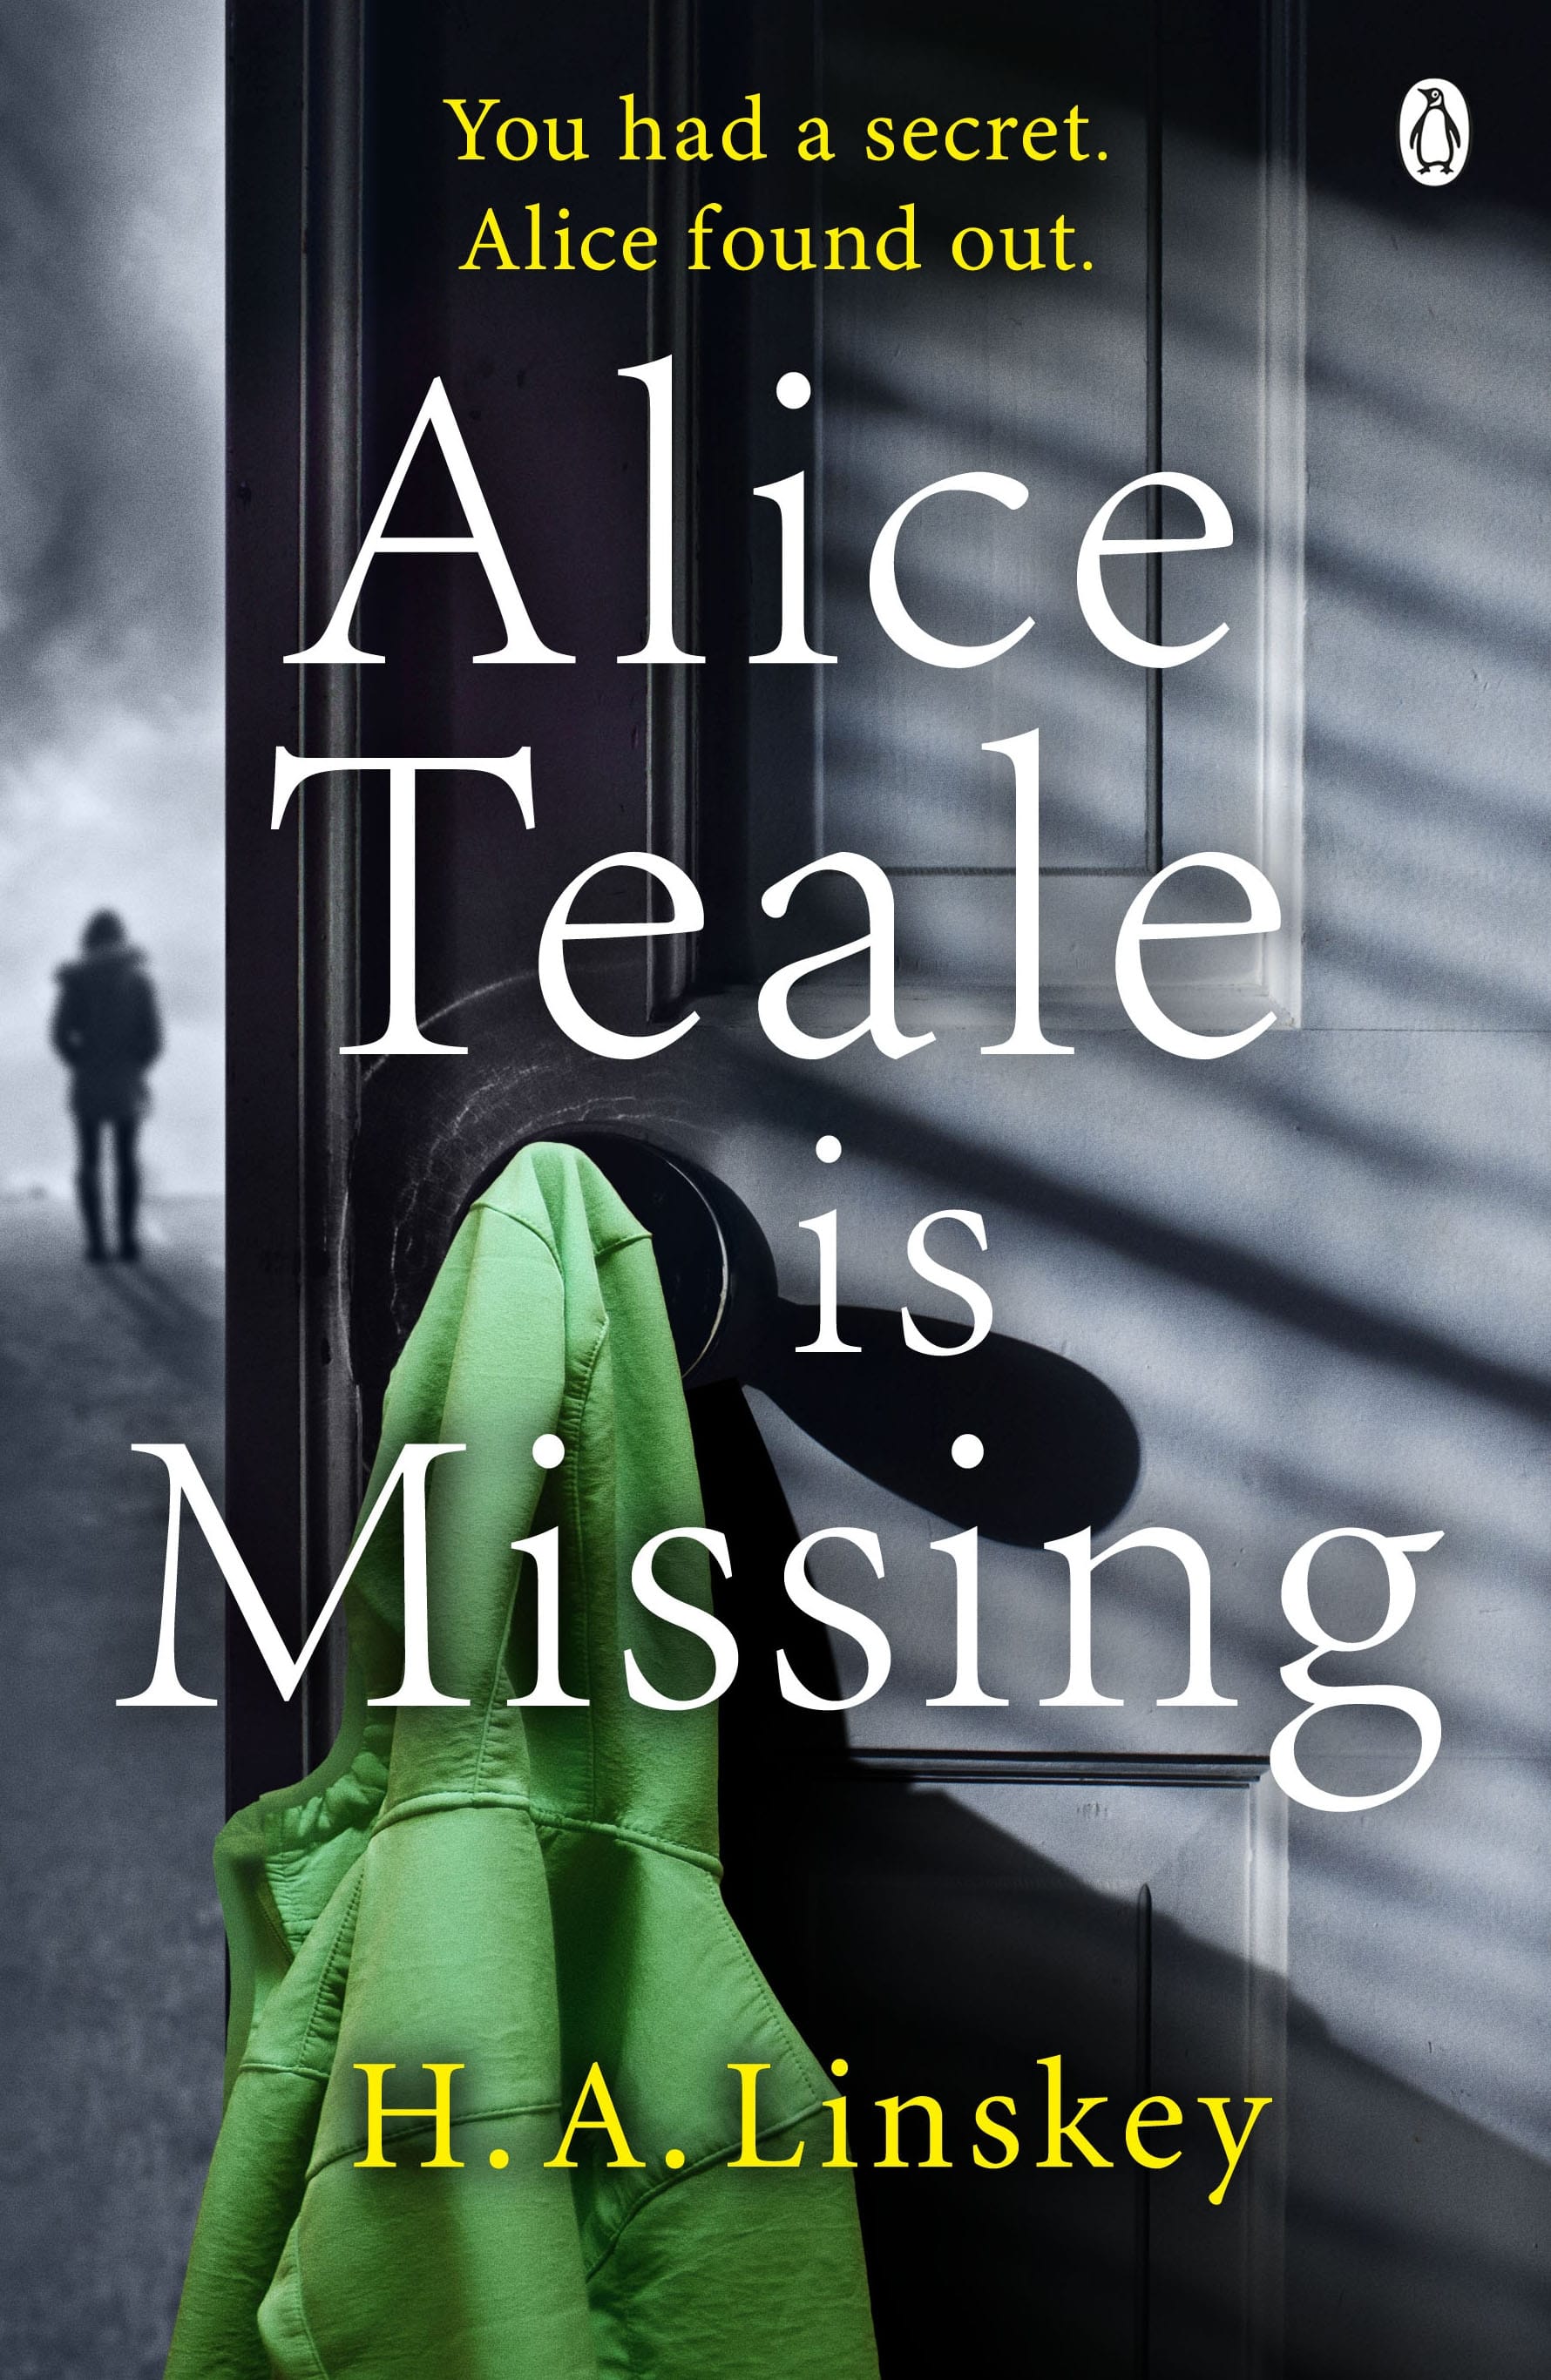 alice teale is missing by h a linskey